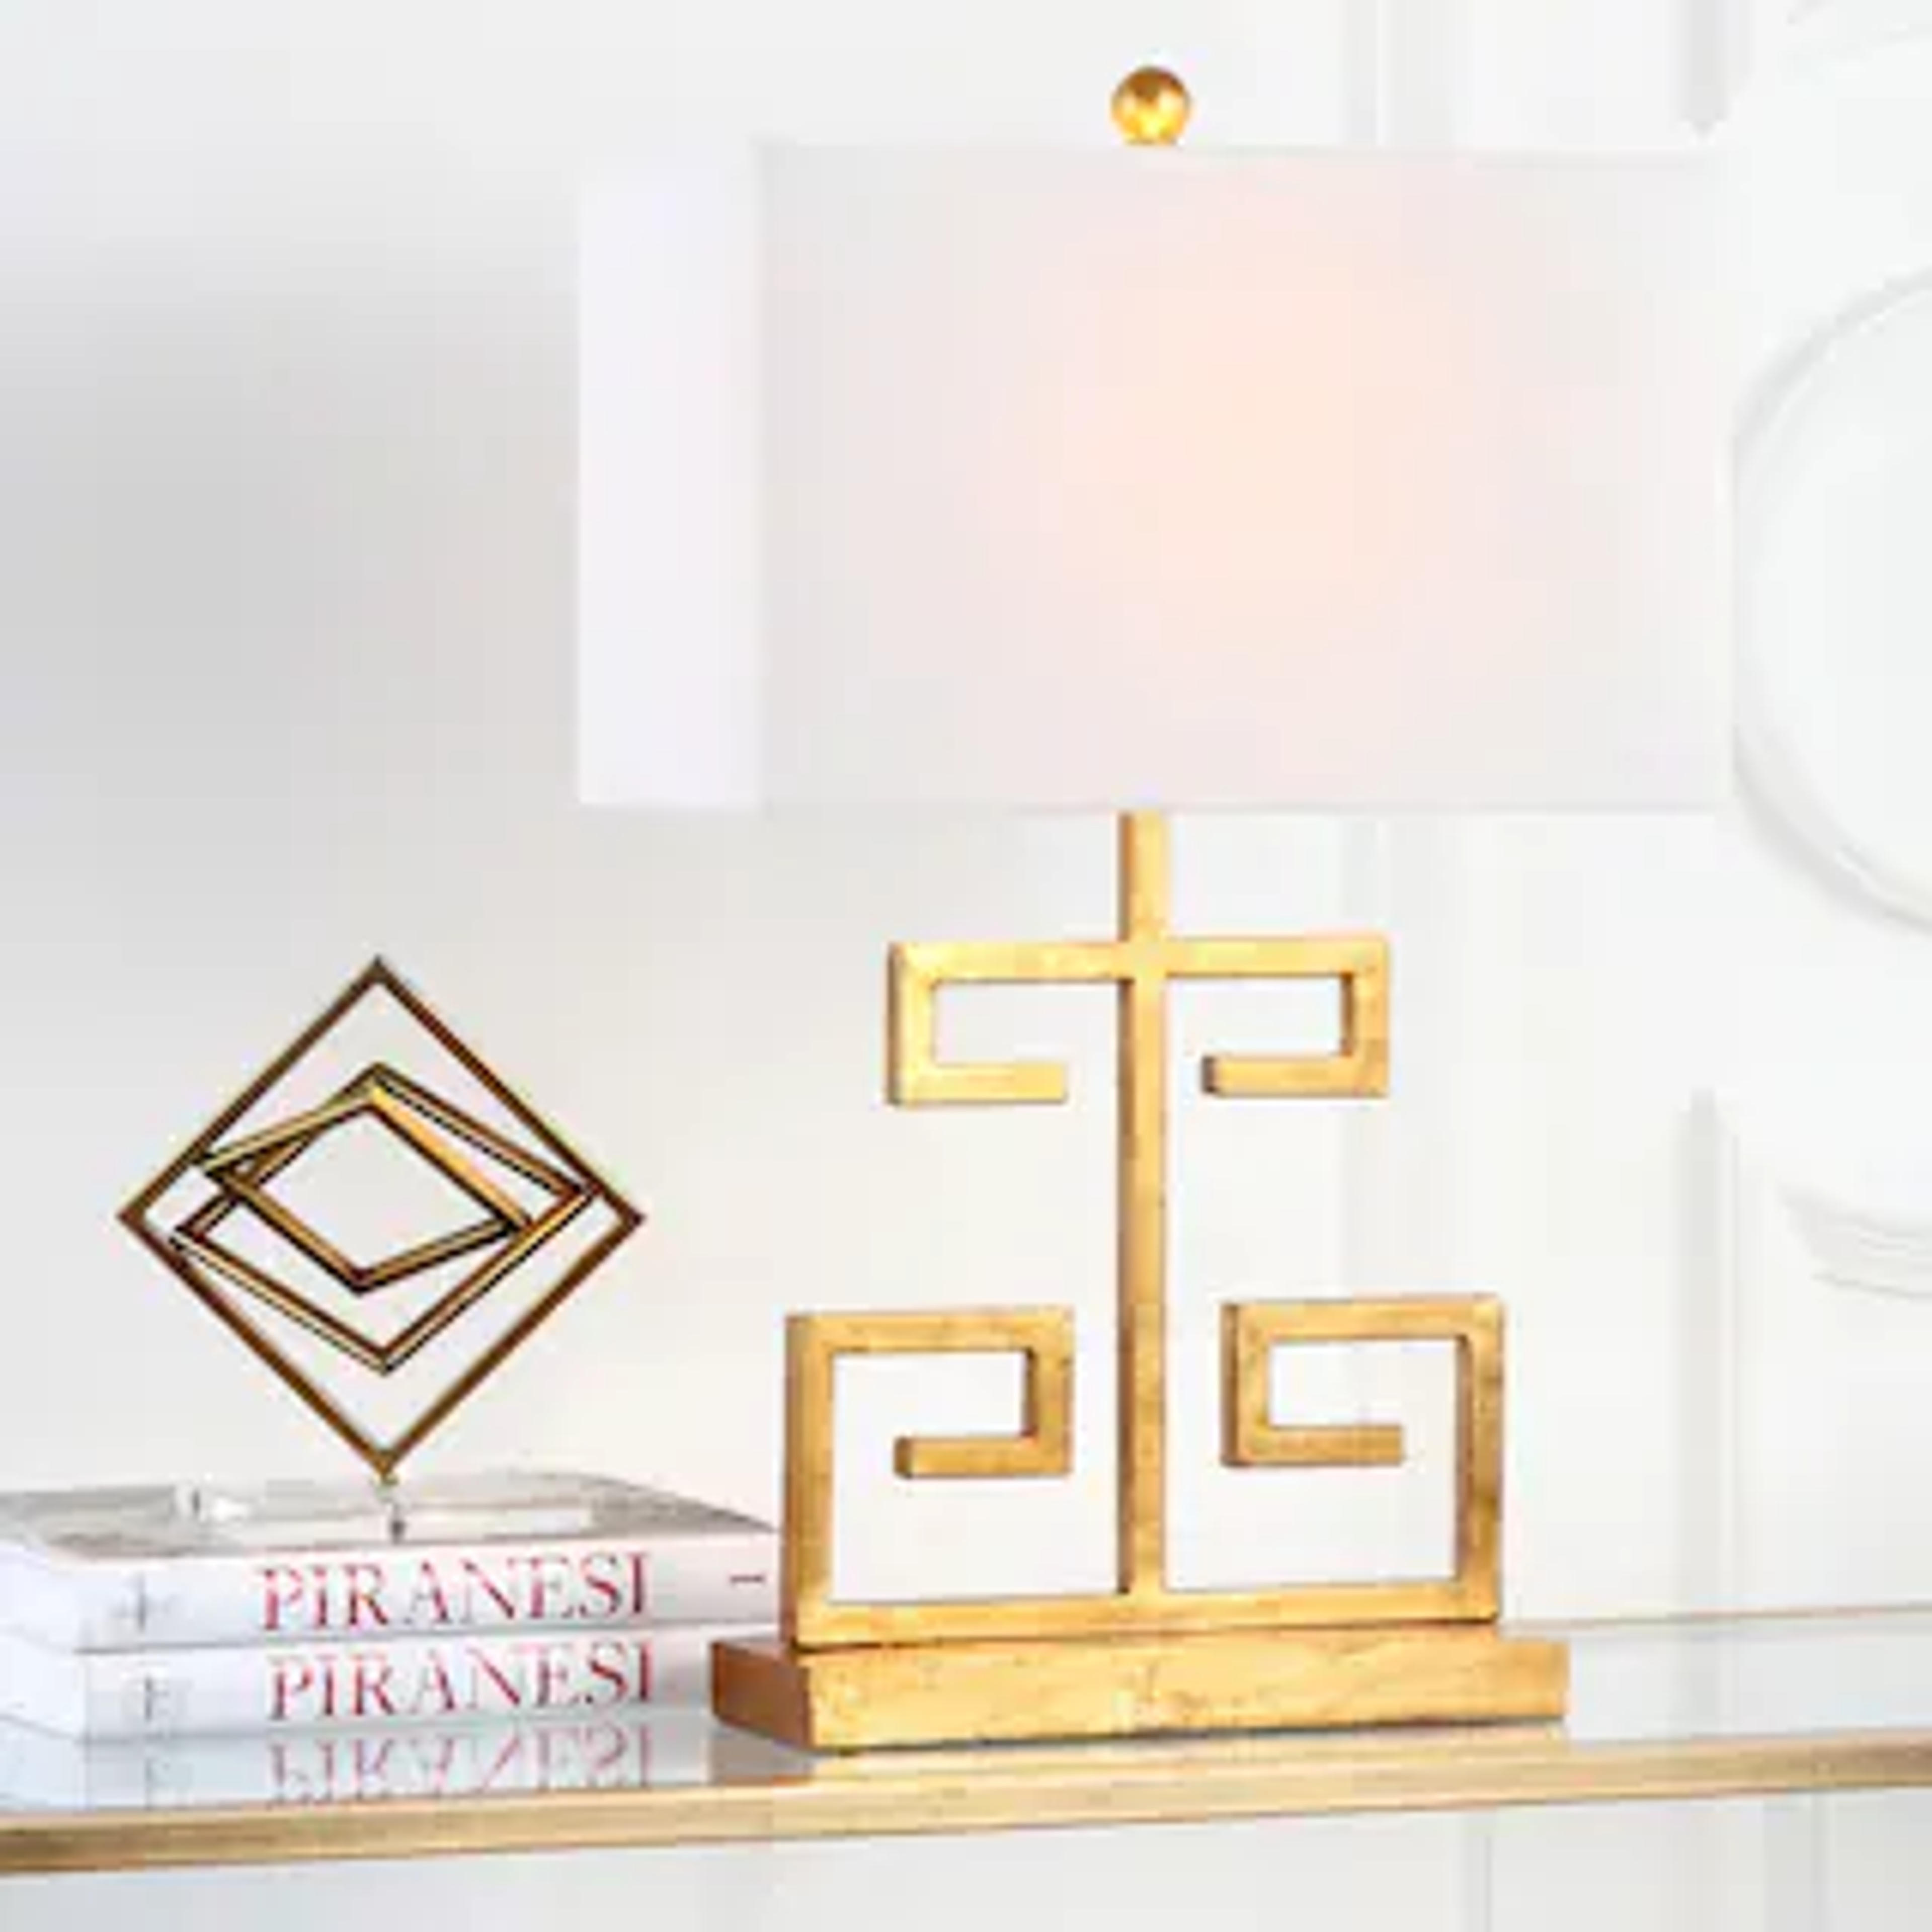 Table Lamps - Bed Bath & Beyond